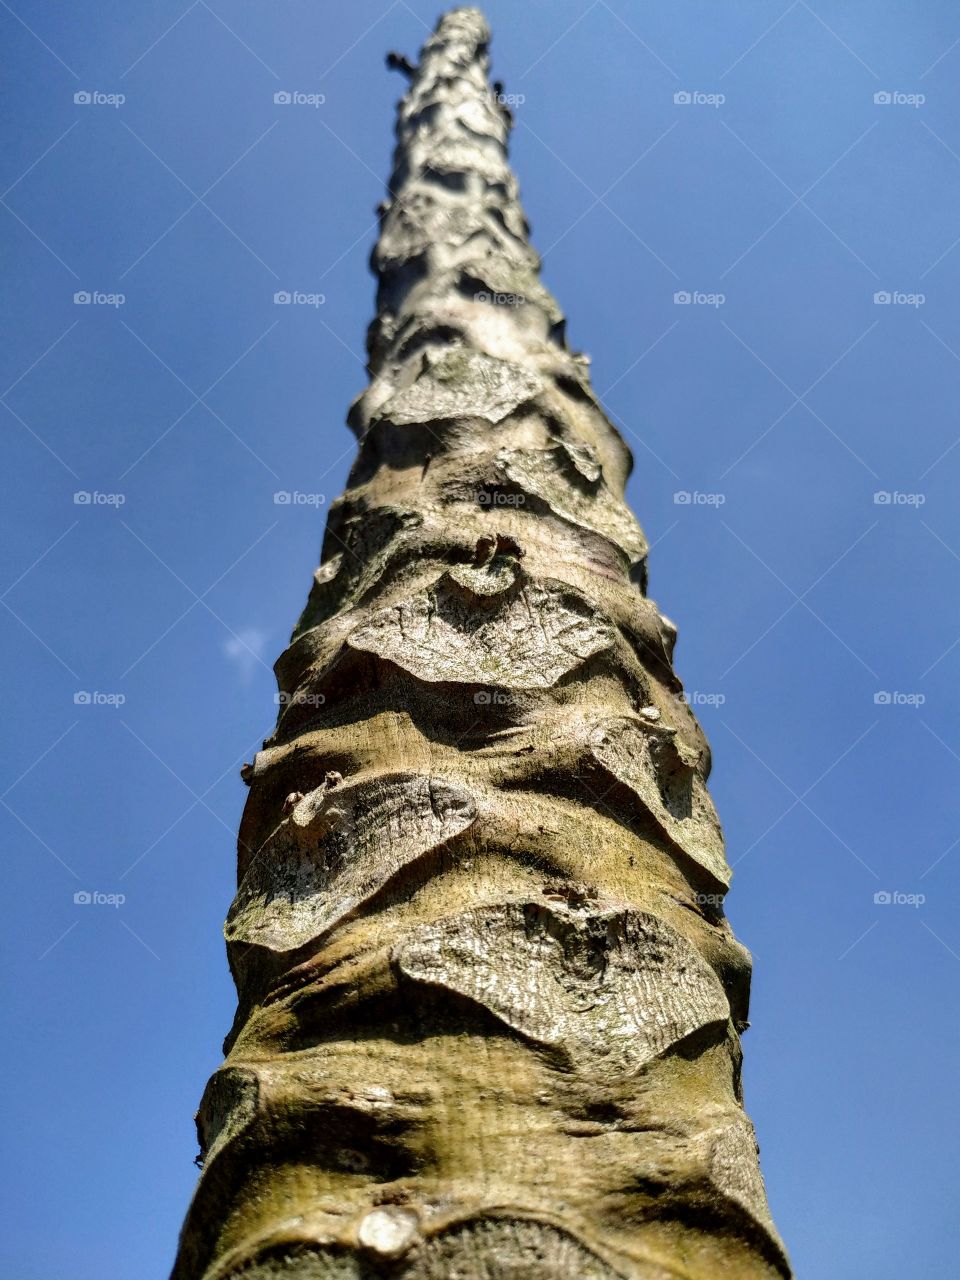 old papaya tree texture with blue sky background